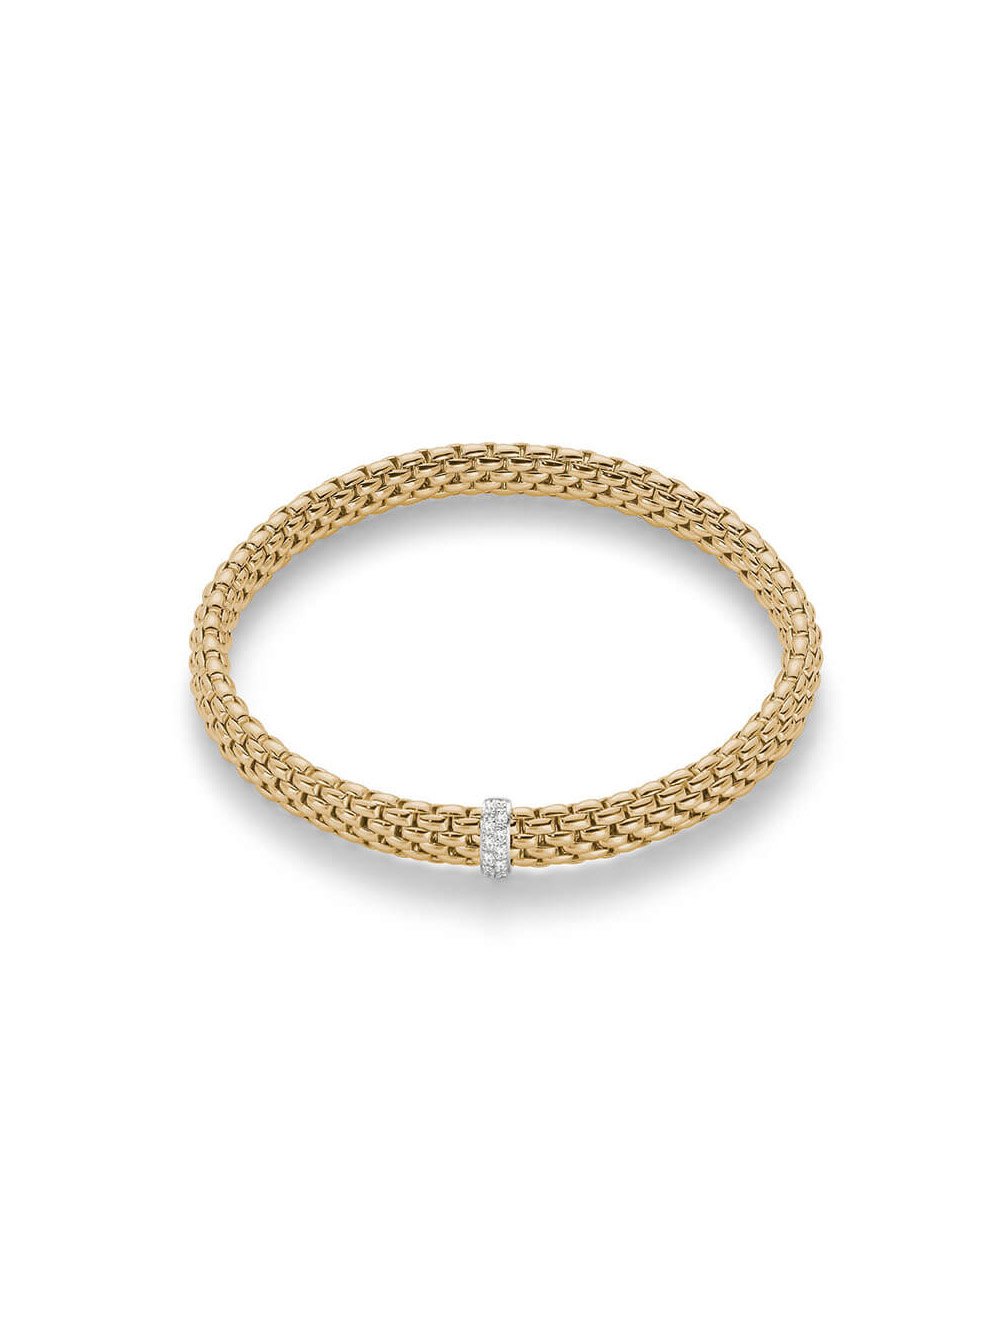 Fope Vendome Bracelet in 18ct Yellow Gold with Diamonds